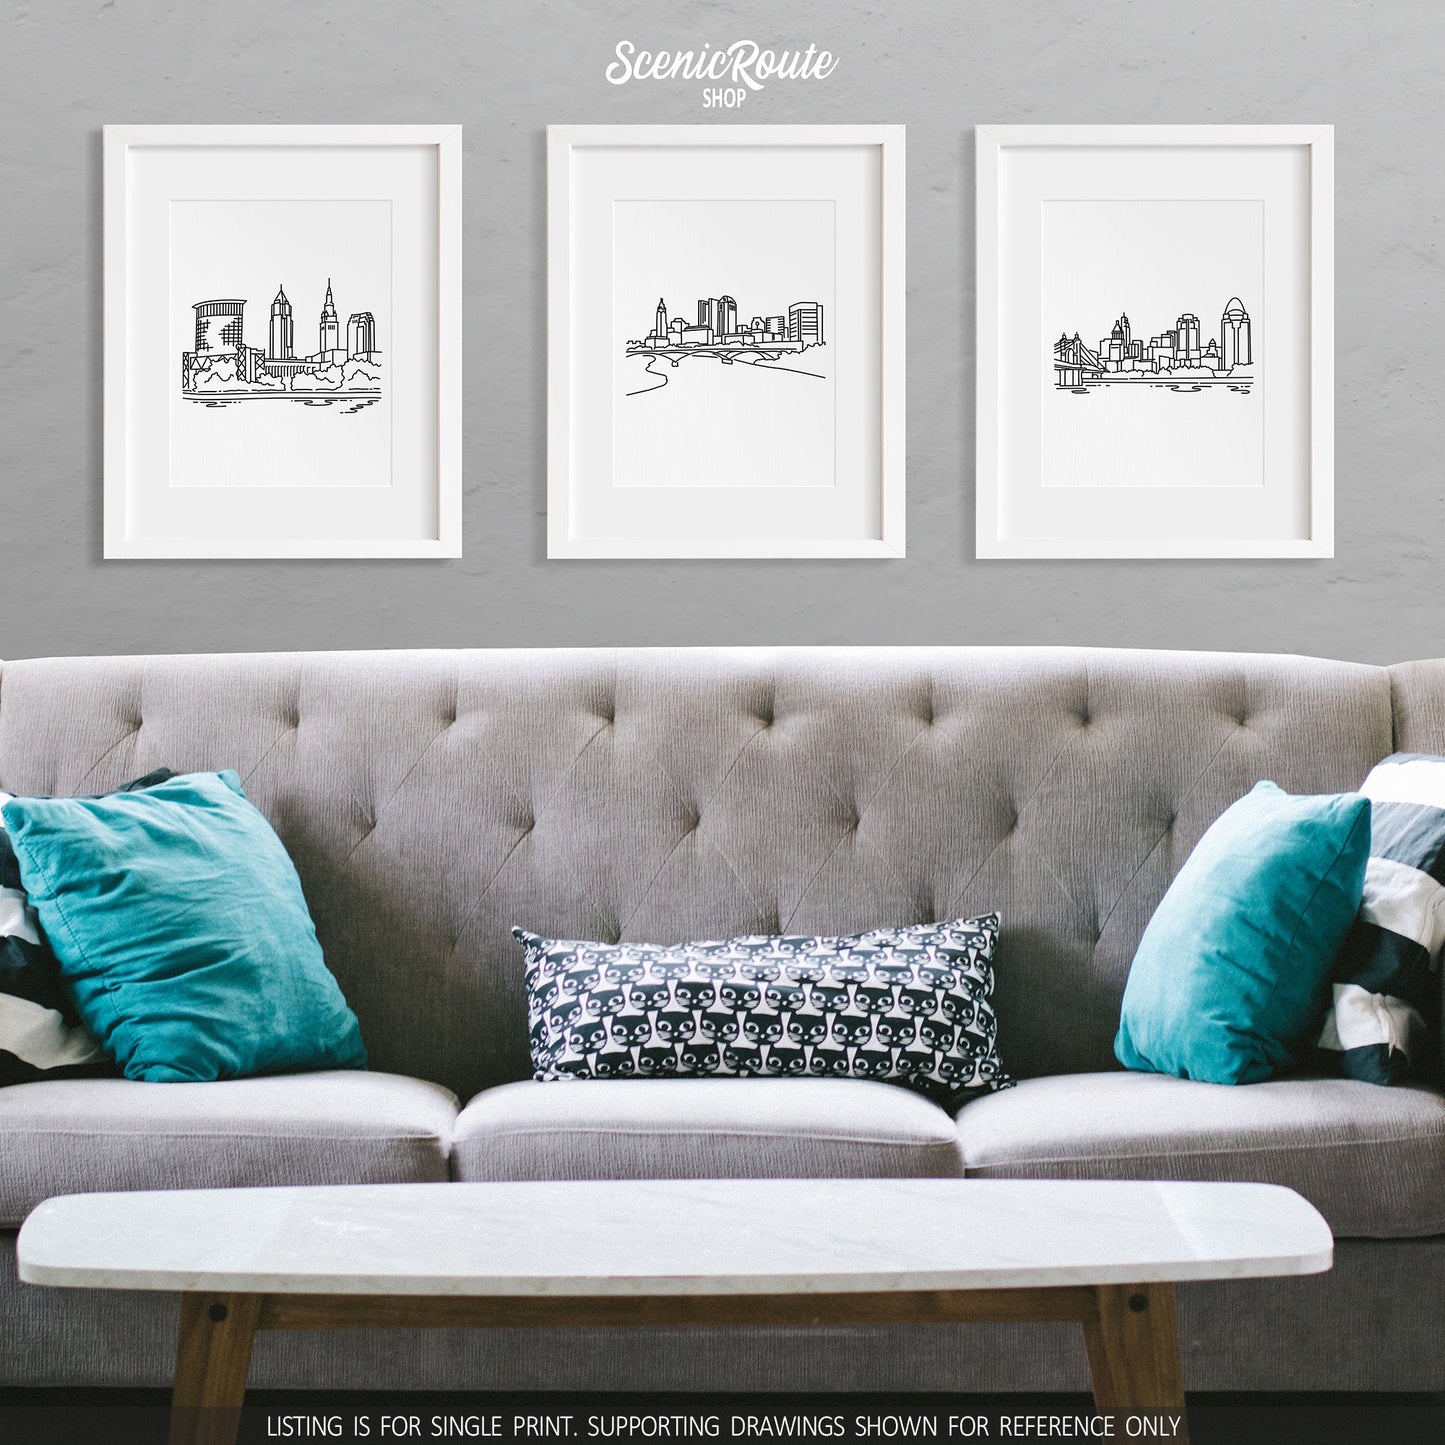 A group of three framed drawings on a wall above a couch with pillows. The line art drawings include the Cleveland Skyline, Columbus Skyline, and Cincinnati Skyline